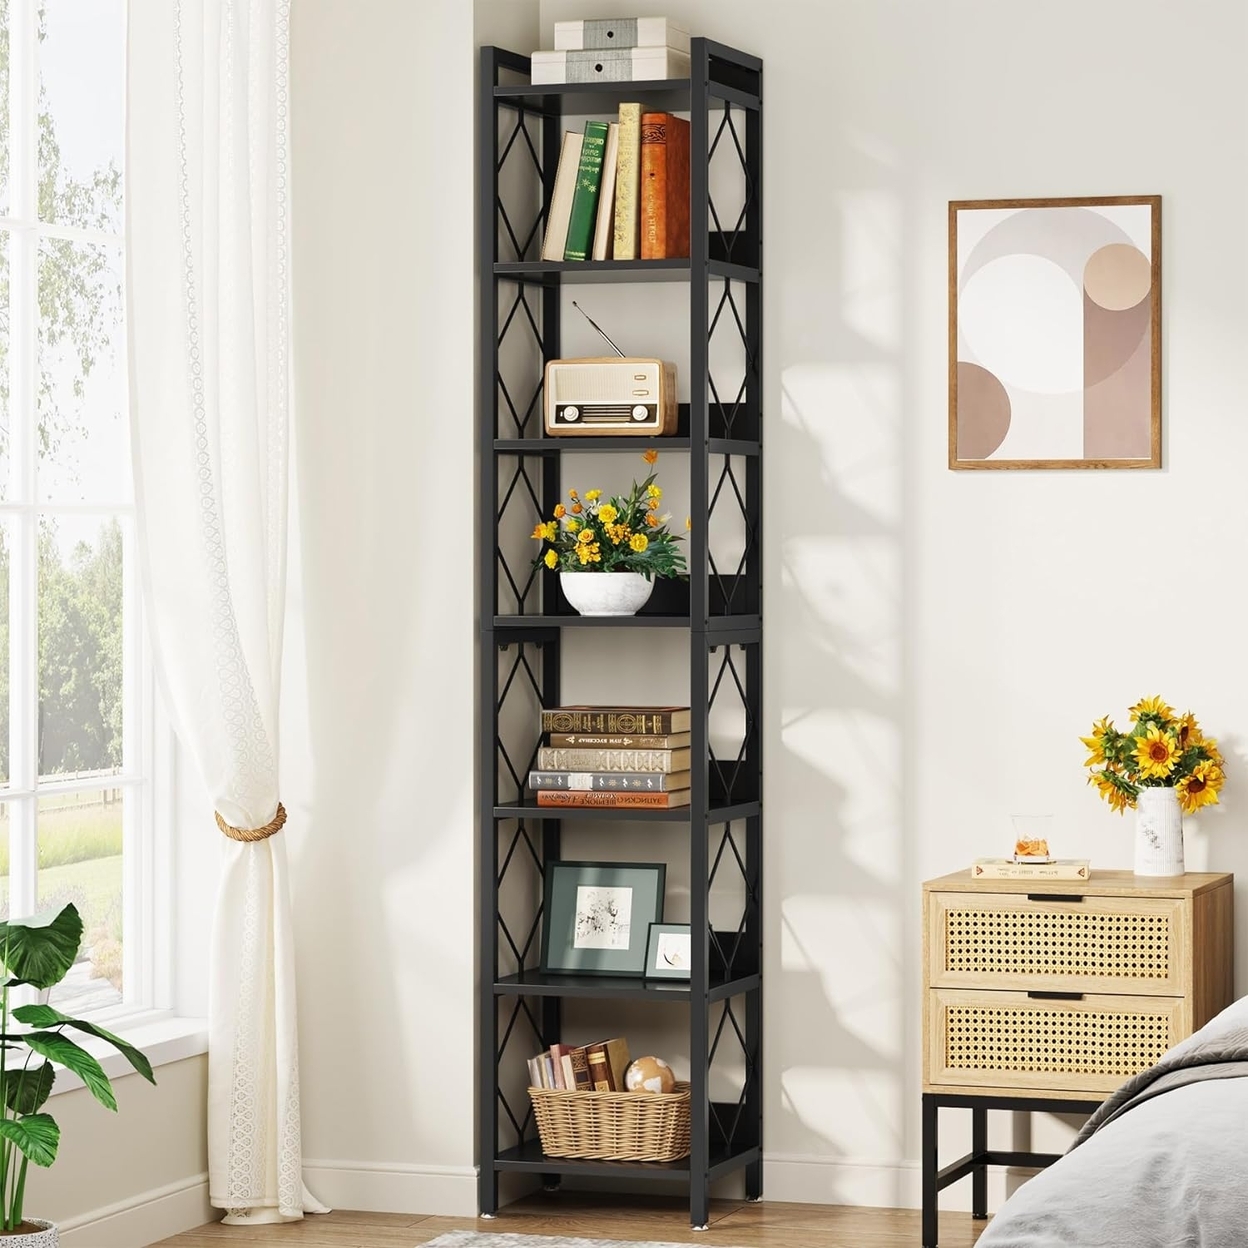 Tribesigns 78.7 Extra Tall Narrow Bookshelf, 7 Tier Skinny Bookcase For Small Spaces, Freestanding Display Shelves - Black, 1pc